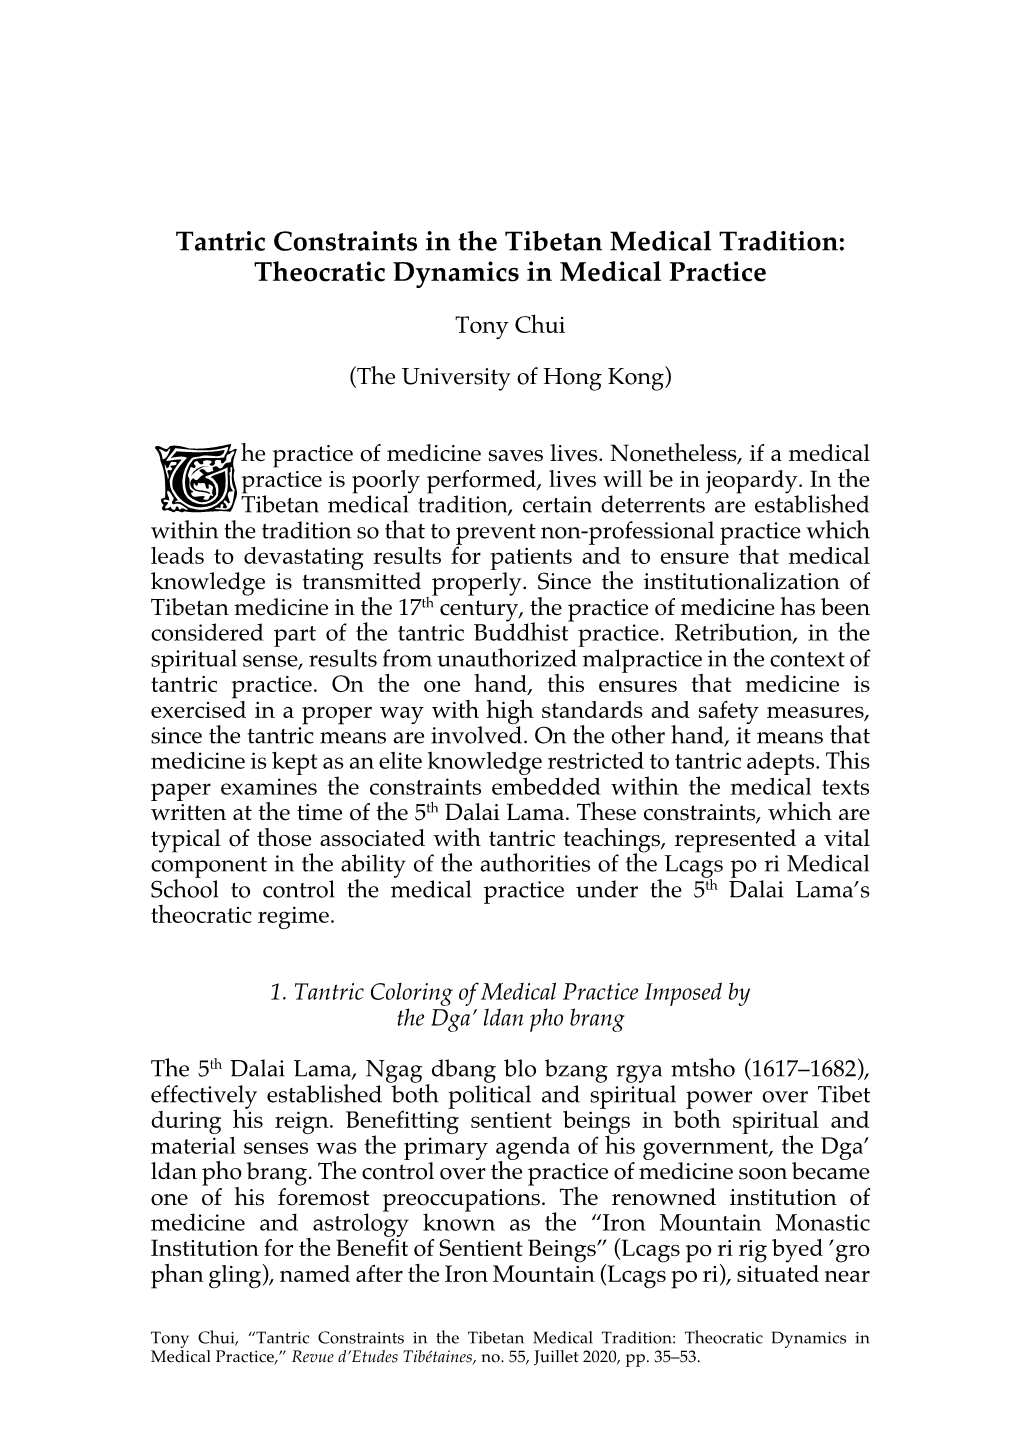 Tantric Constraints in the Tibetan Medical Tradition: Theocratic Dynamics in Medical Practice